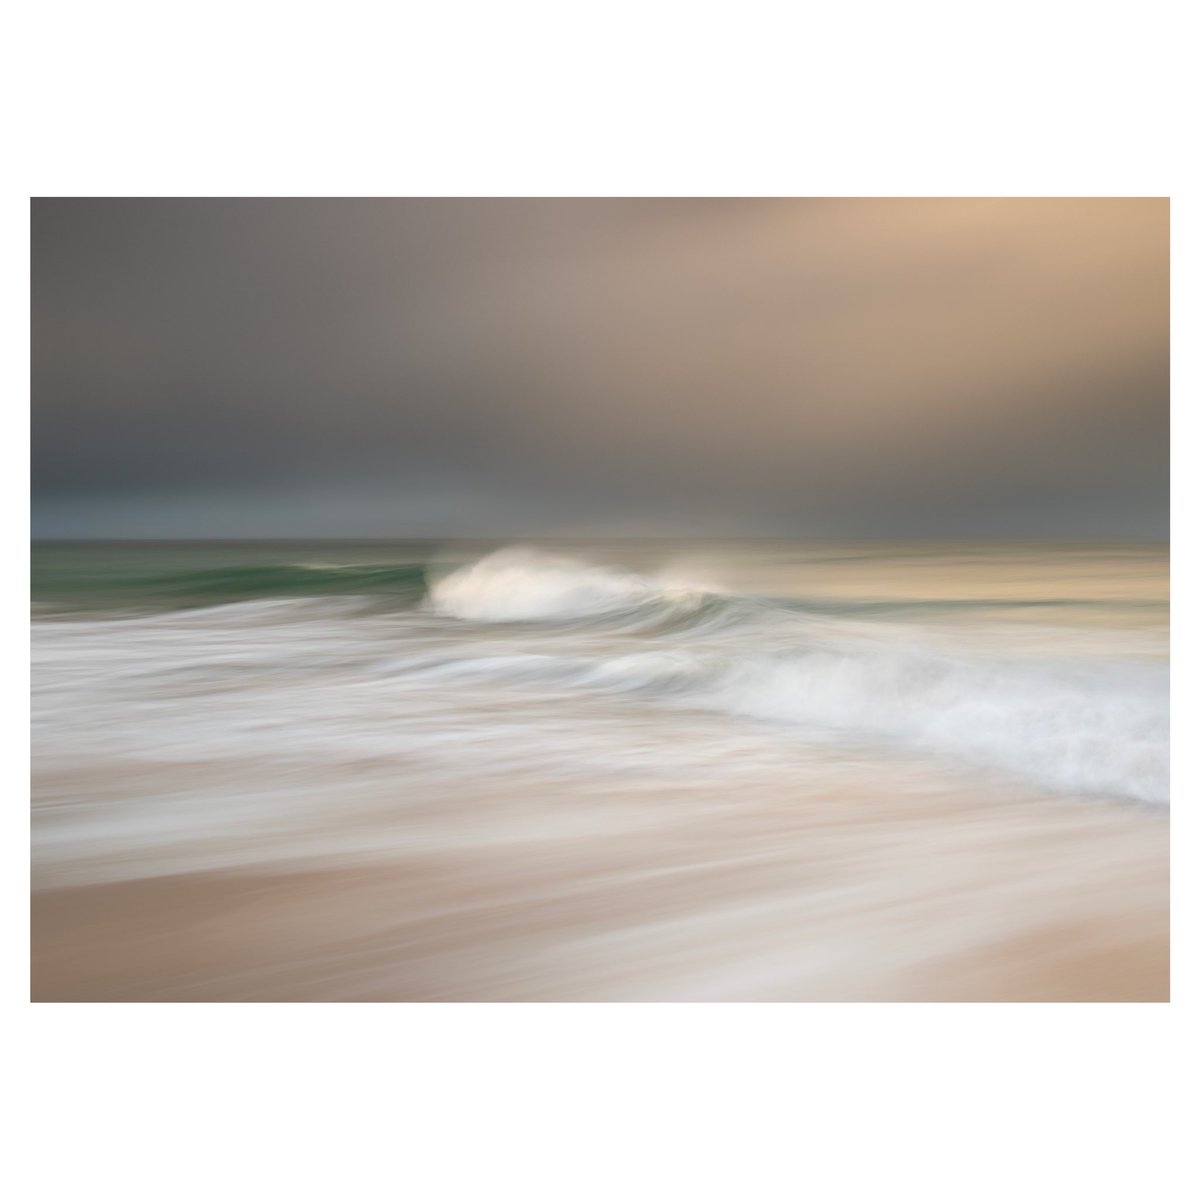 Wonderful conditions up in #aberdeenshire perfect for some #icmphotography and a nice #slowshutter